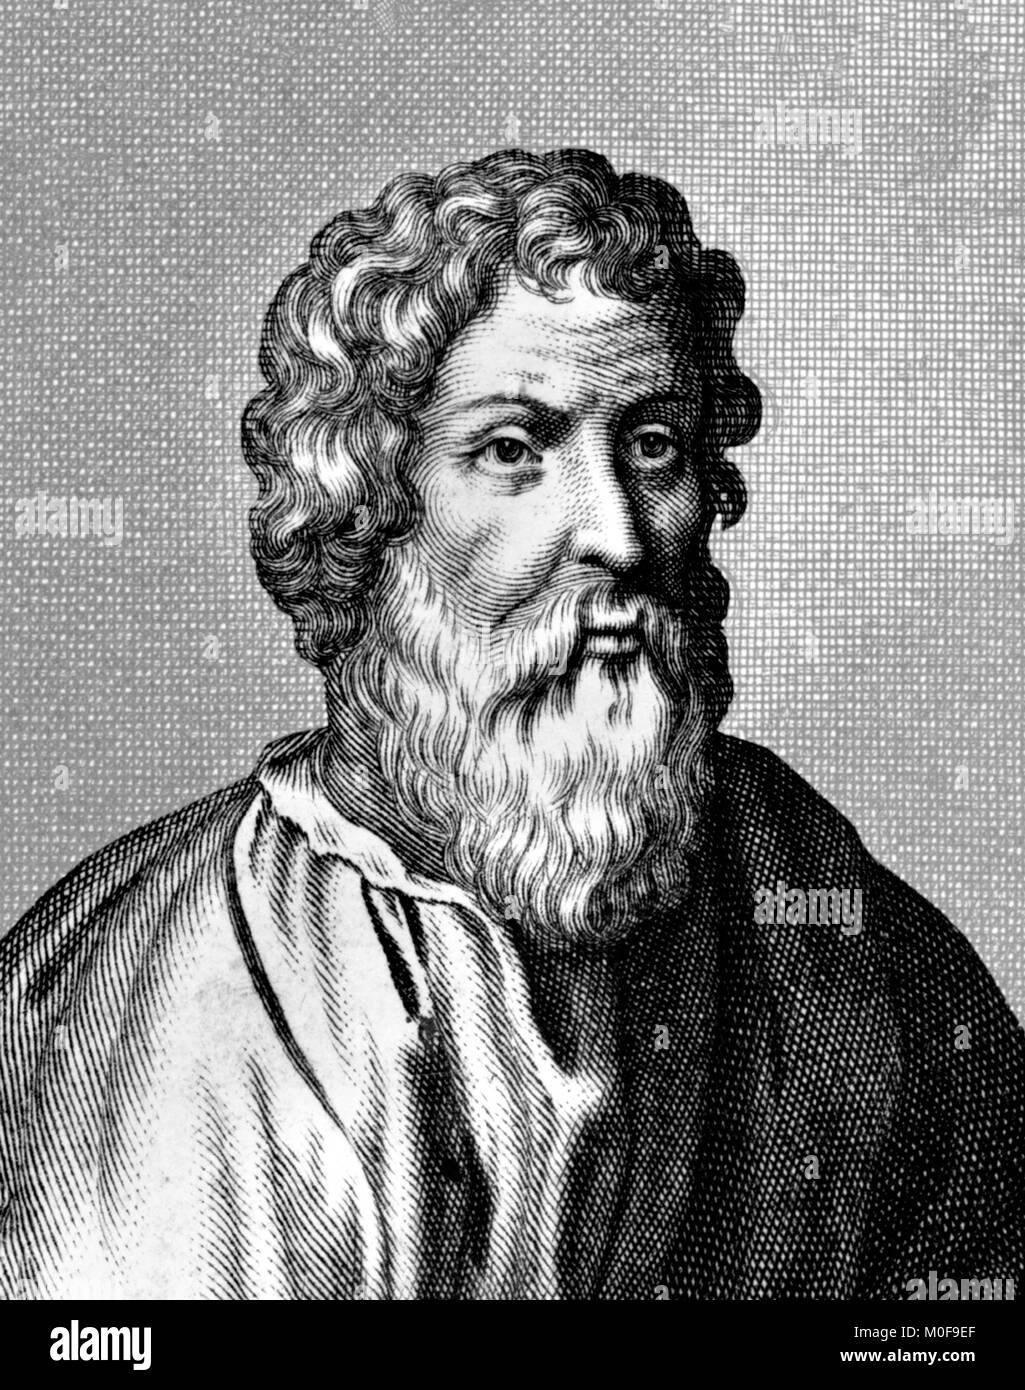 Hippocrates (c.460-370 BC). Late 17th or early 18th century engraving by Michael van der Gucht. Stock Photo